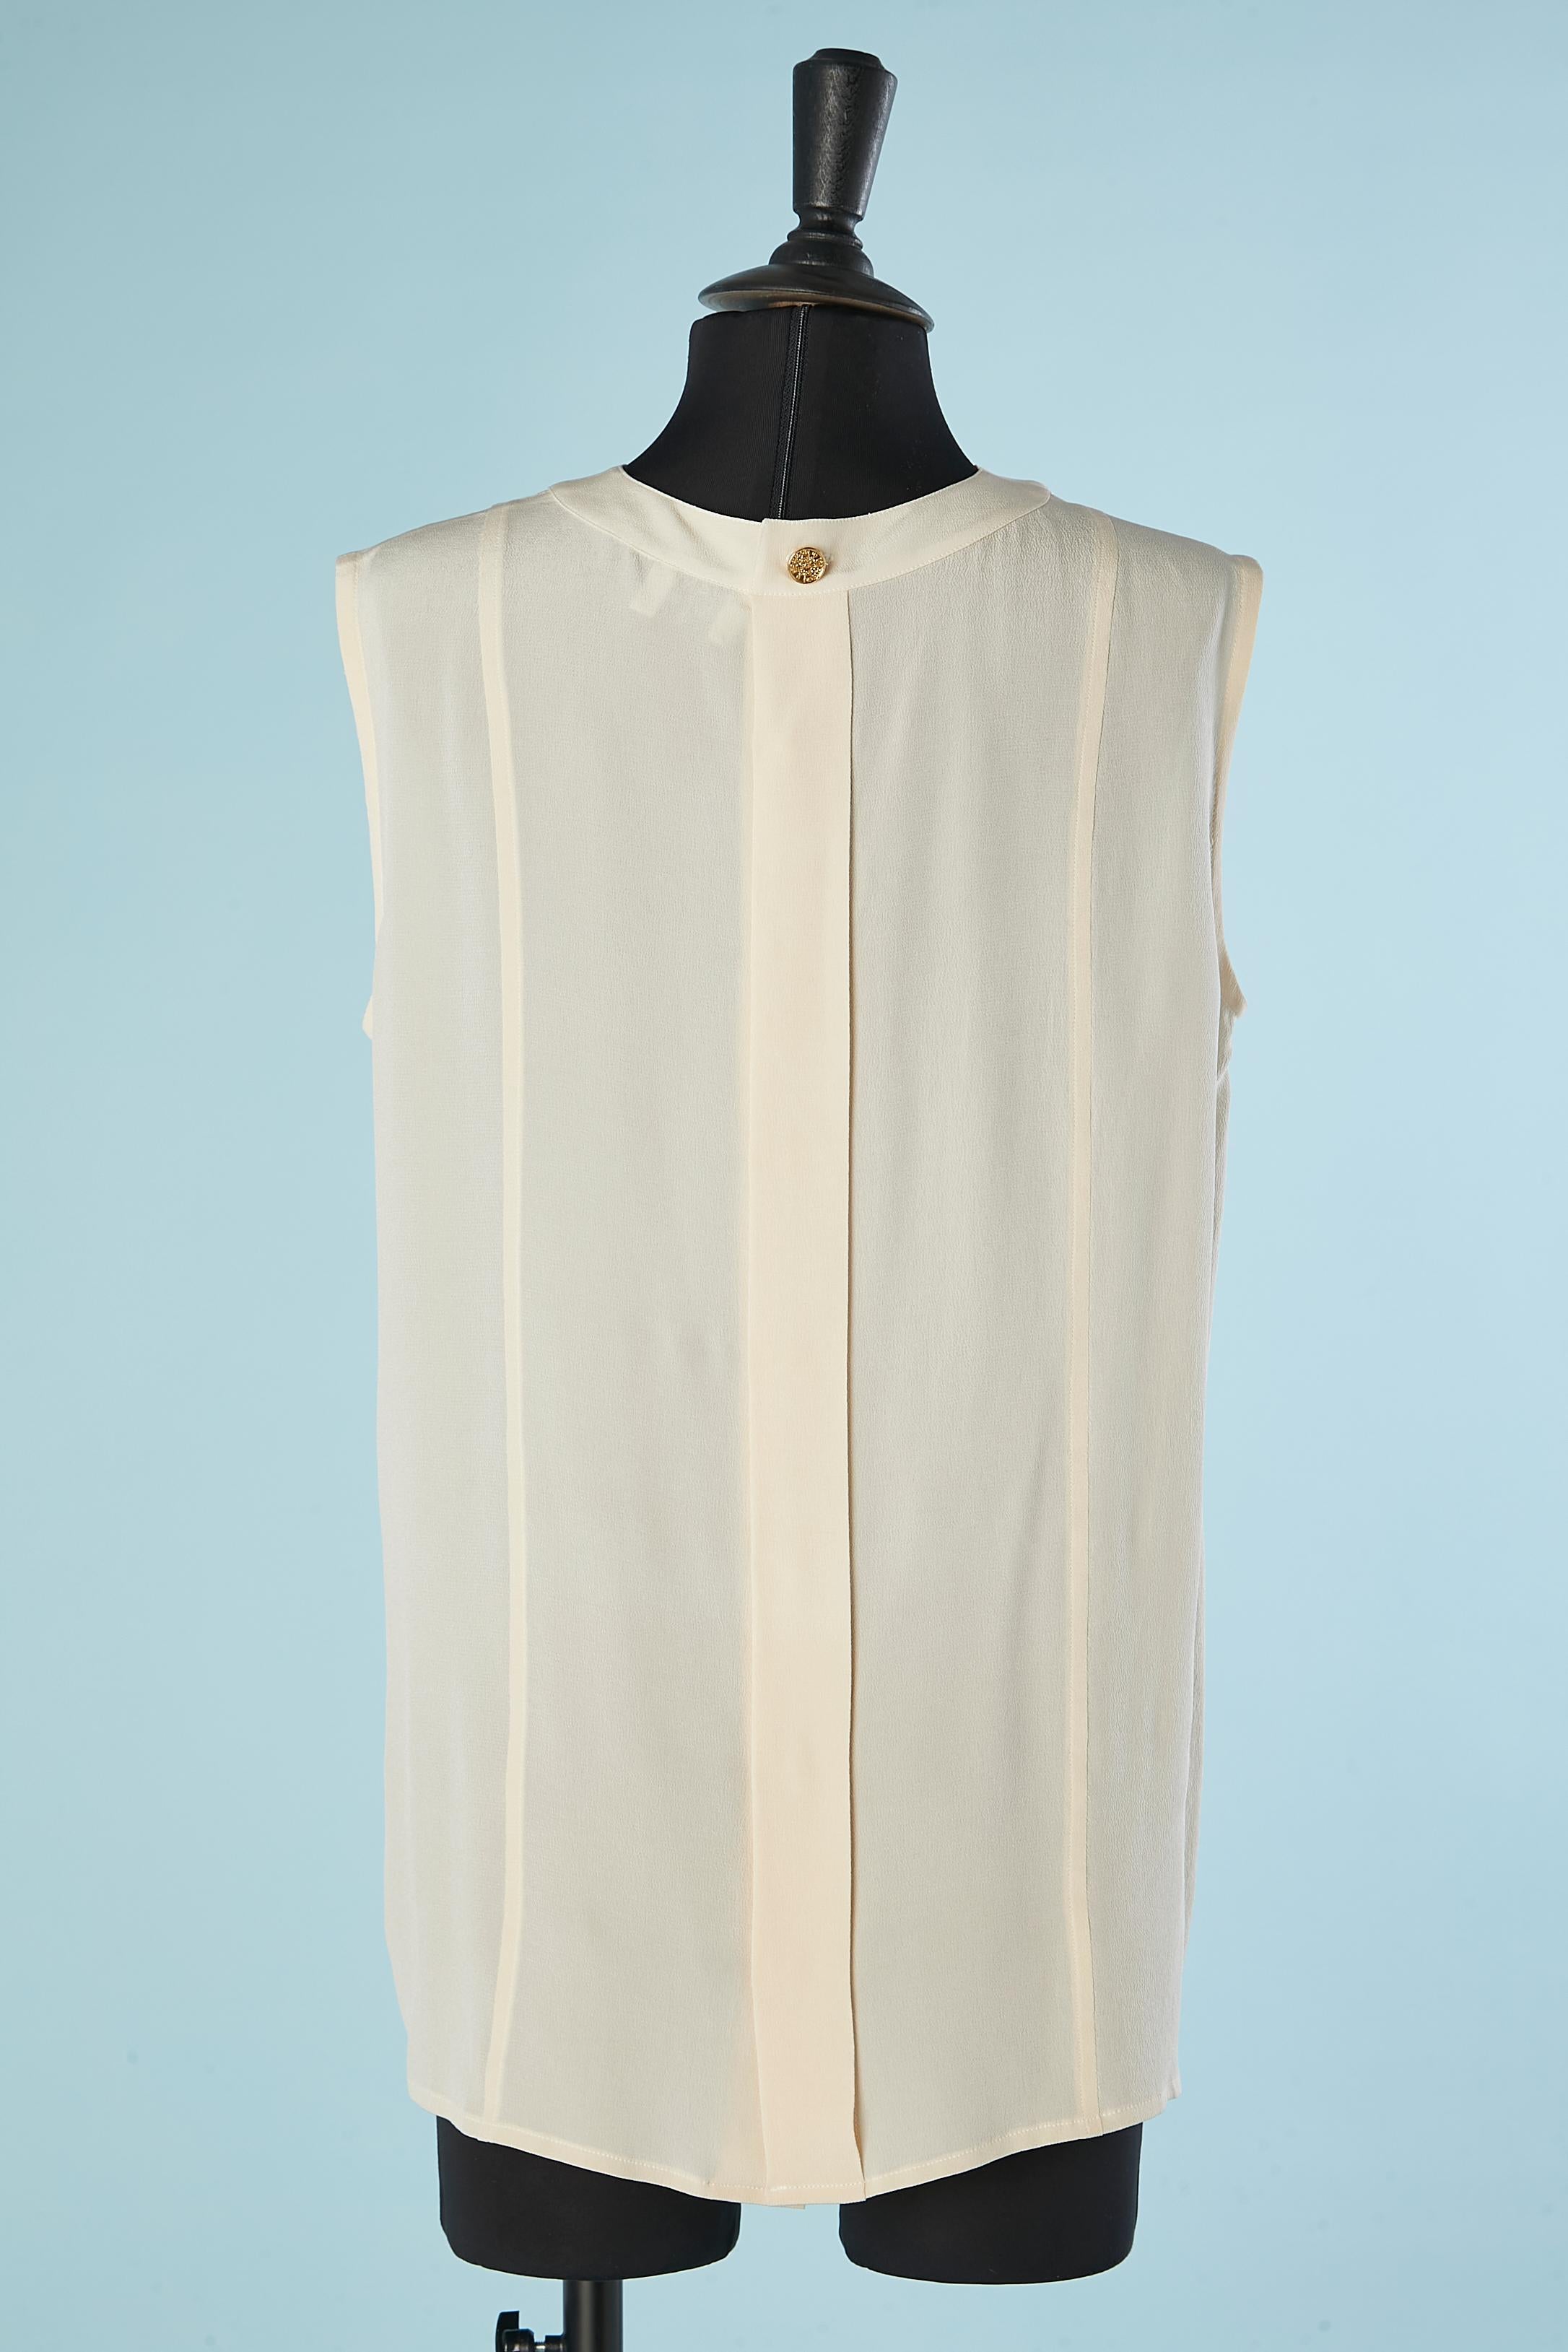 Sleeveless ivory top with buttons in the middle back Chanel Boutique  In Excellent Condition For Sale In Saint-Ouen-Sur-Seine, FR